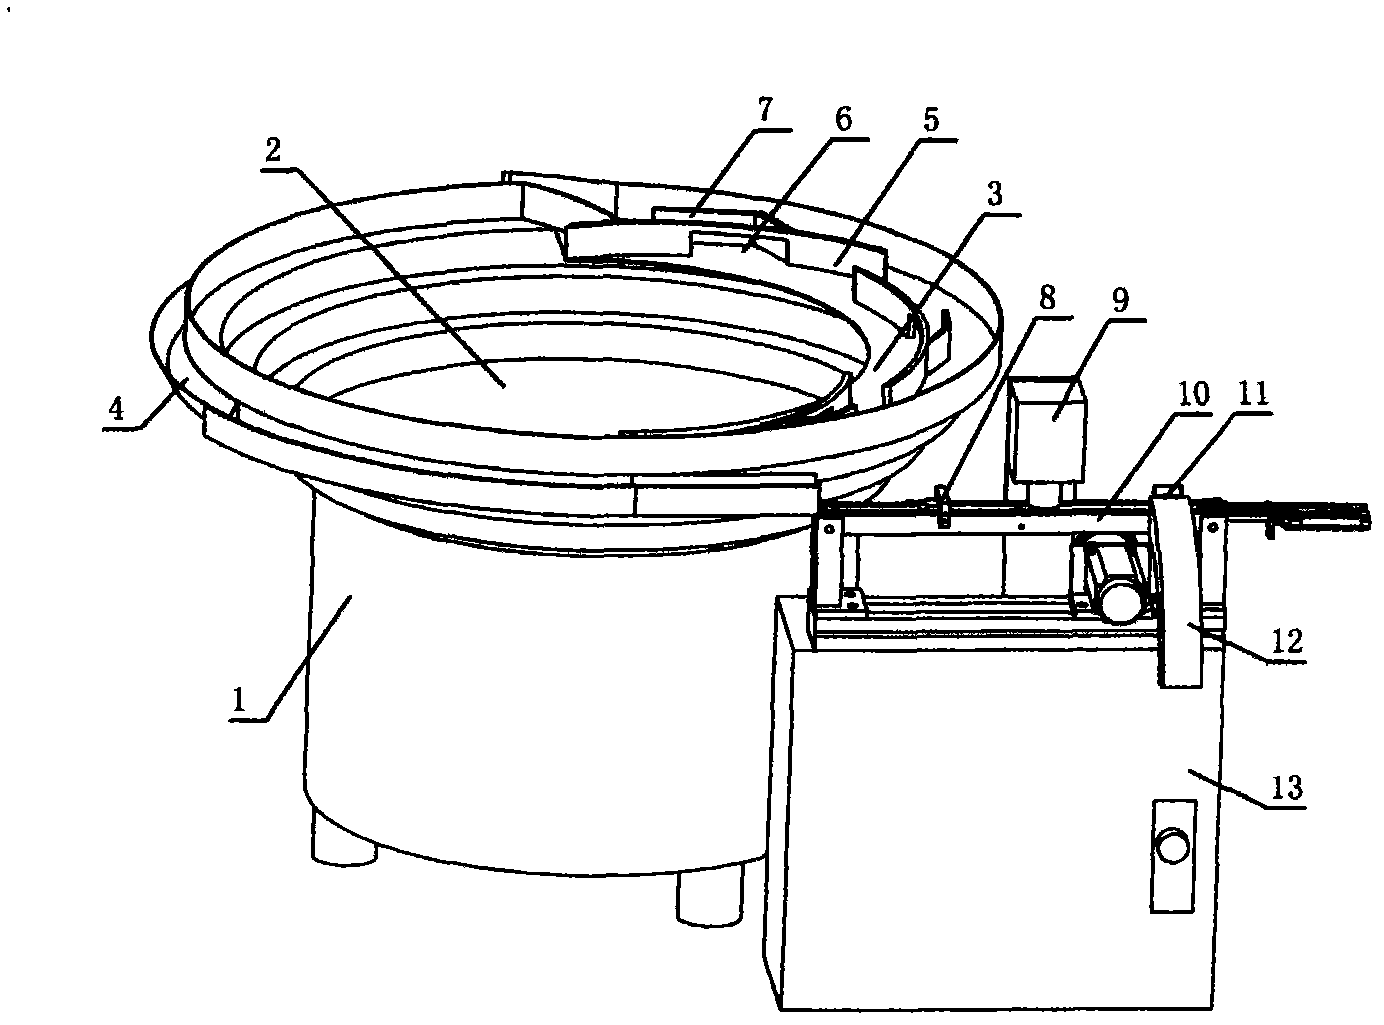 Method and equipment for automatically feeding badminton feathers